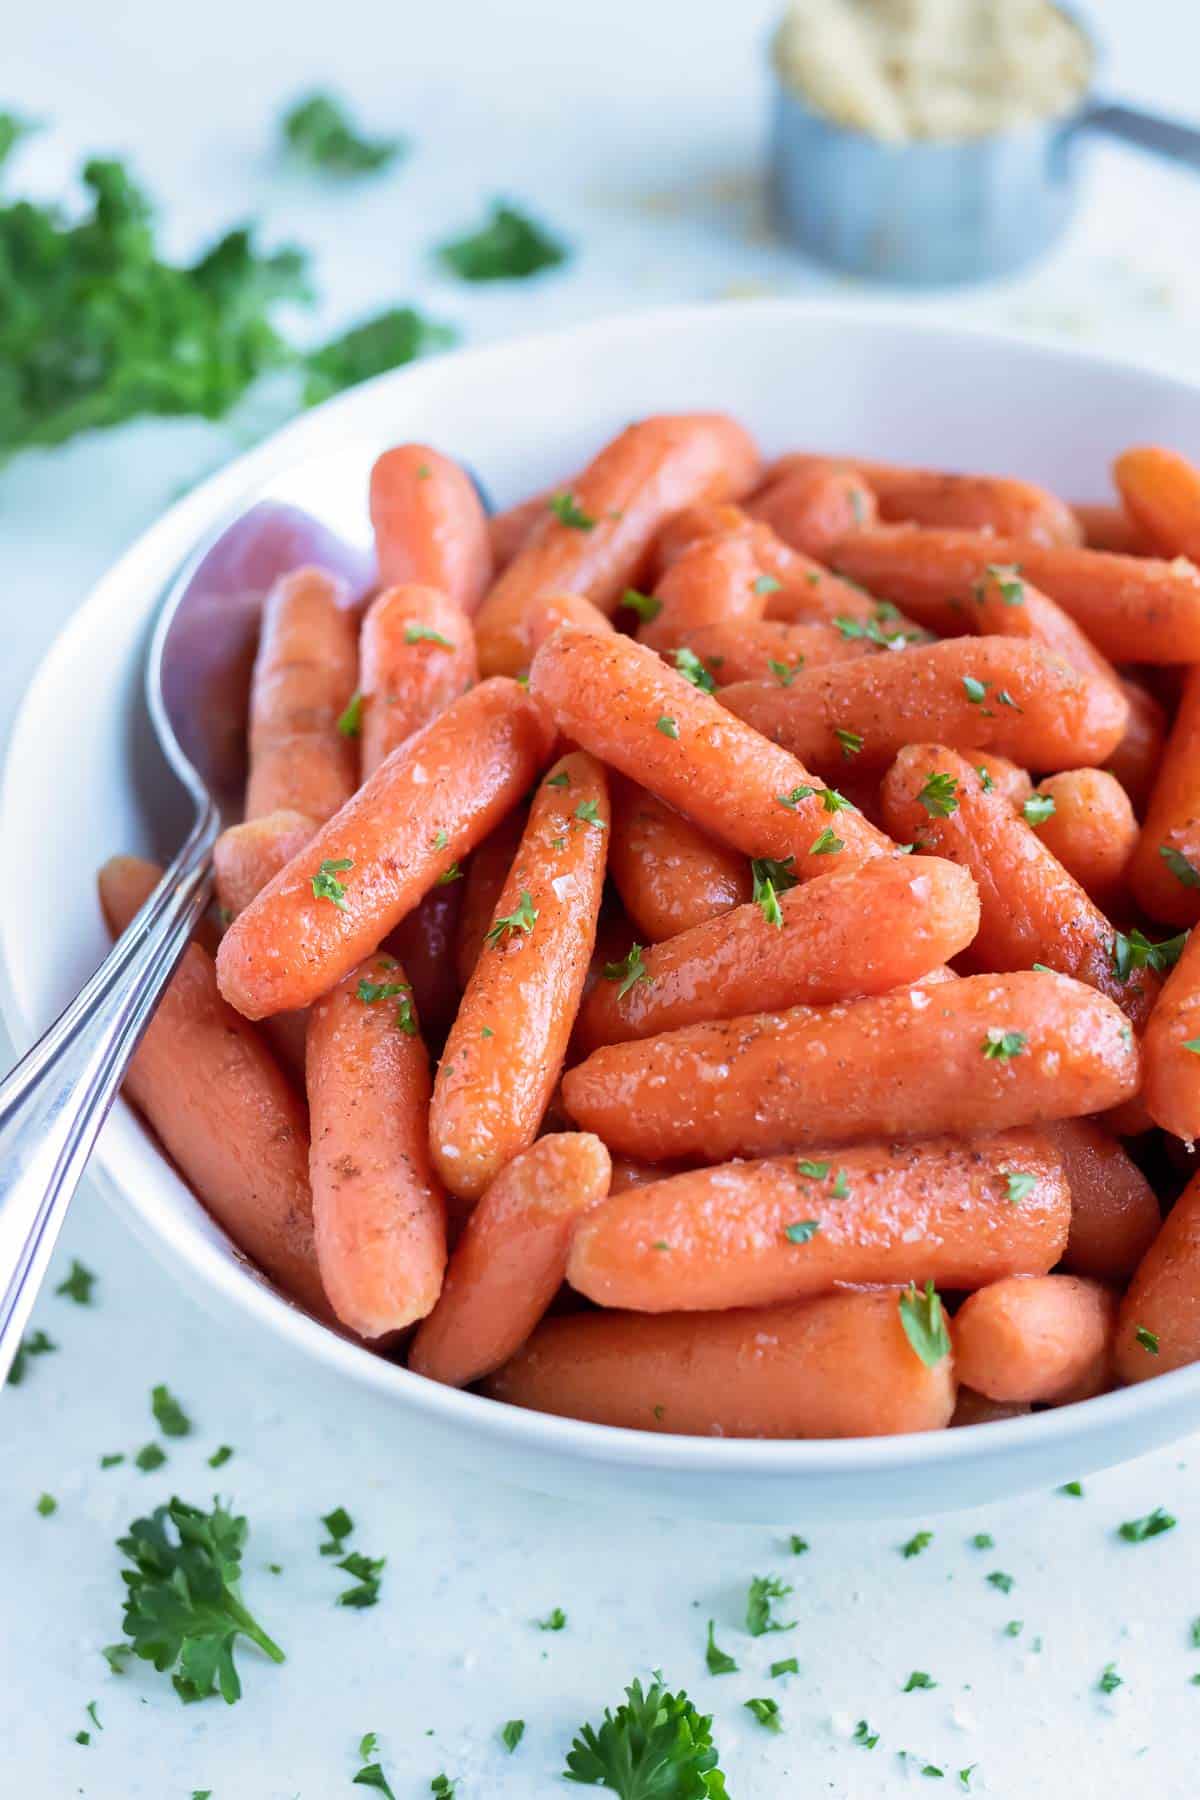 Glazed carrots made in the pressure cooker are served in a white bowl with a spoon.